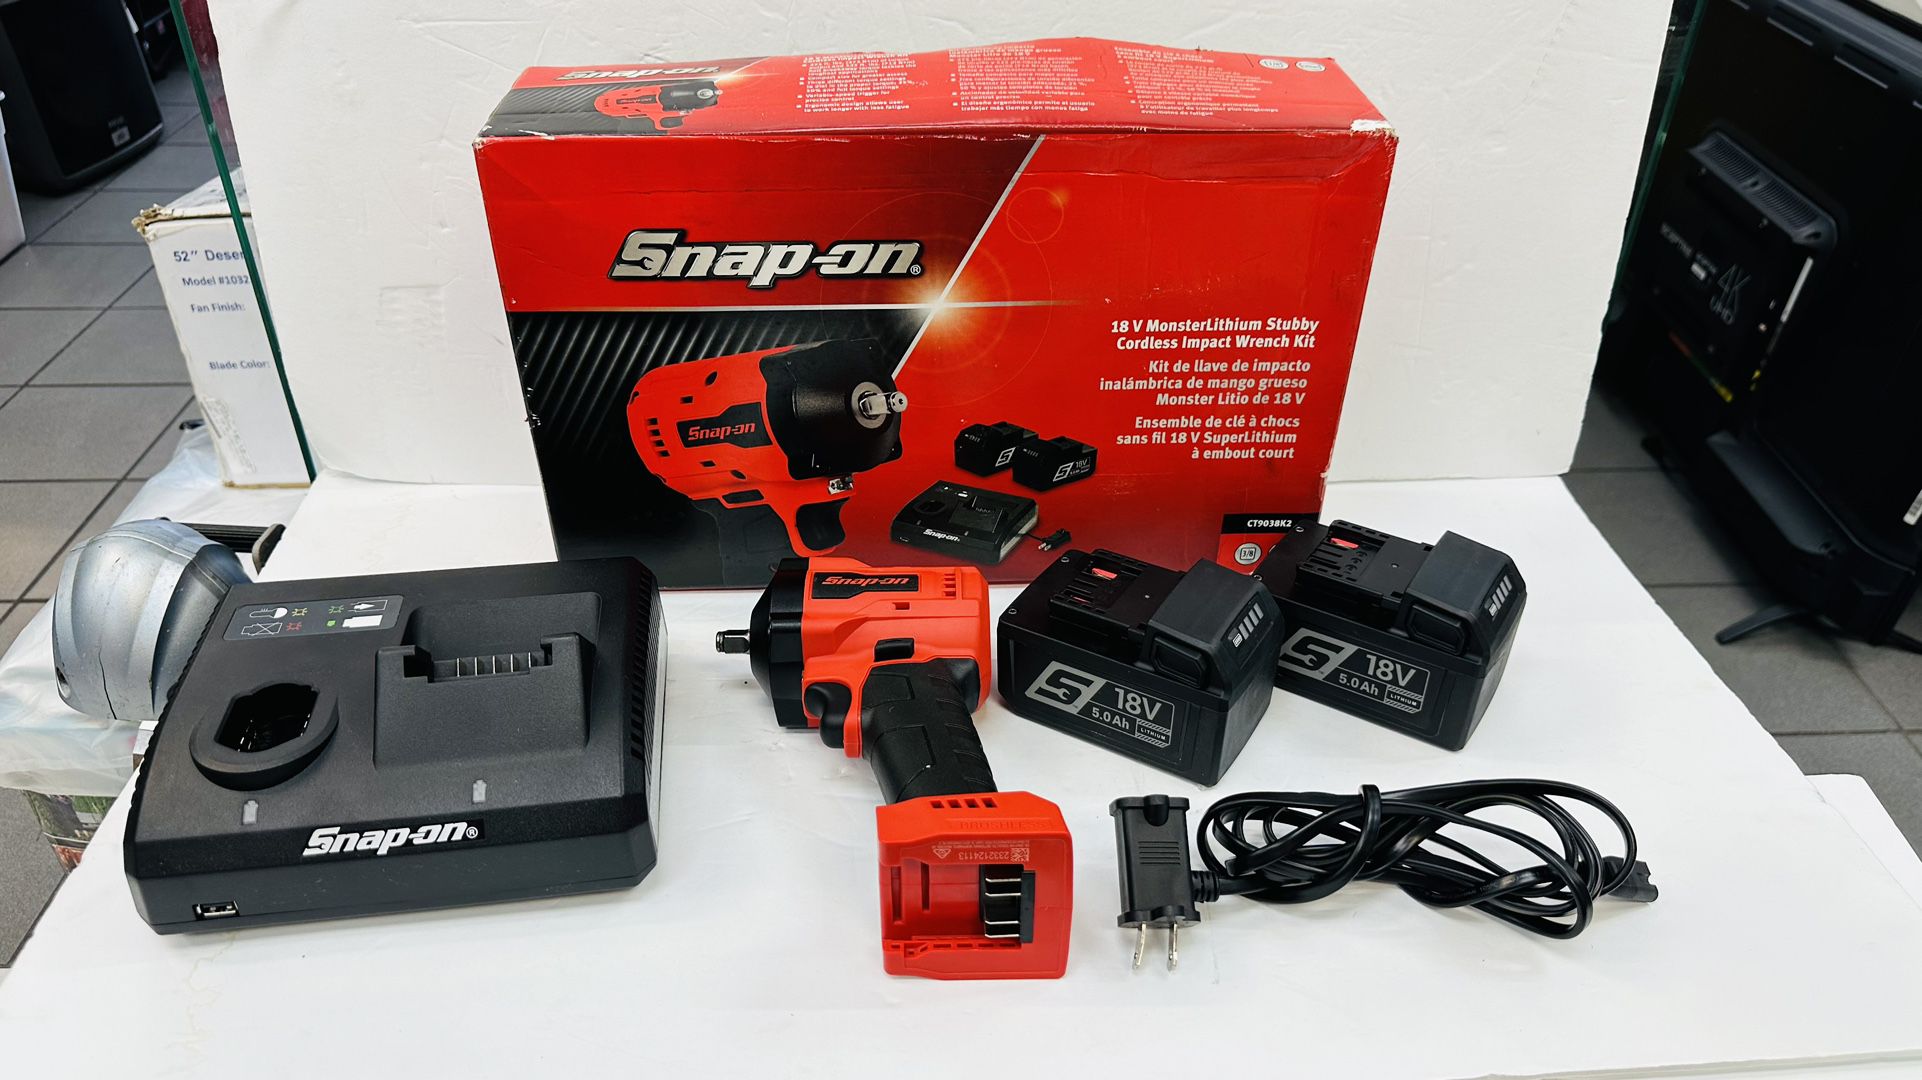 Snap On 3/8" Stubby 18V Cordless Impact Wrench CT9038K2 2x 5 Ah Batteries Charger MINT